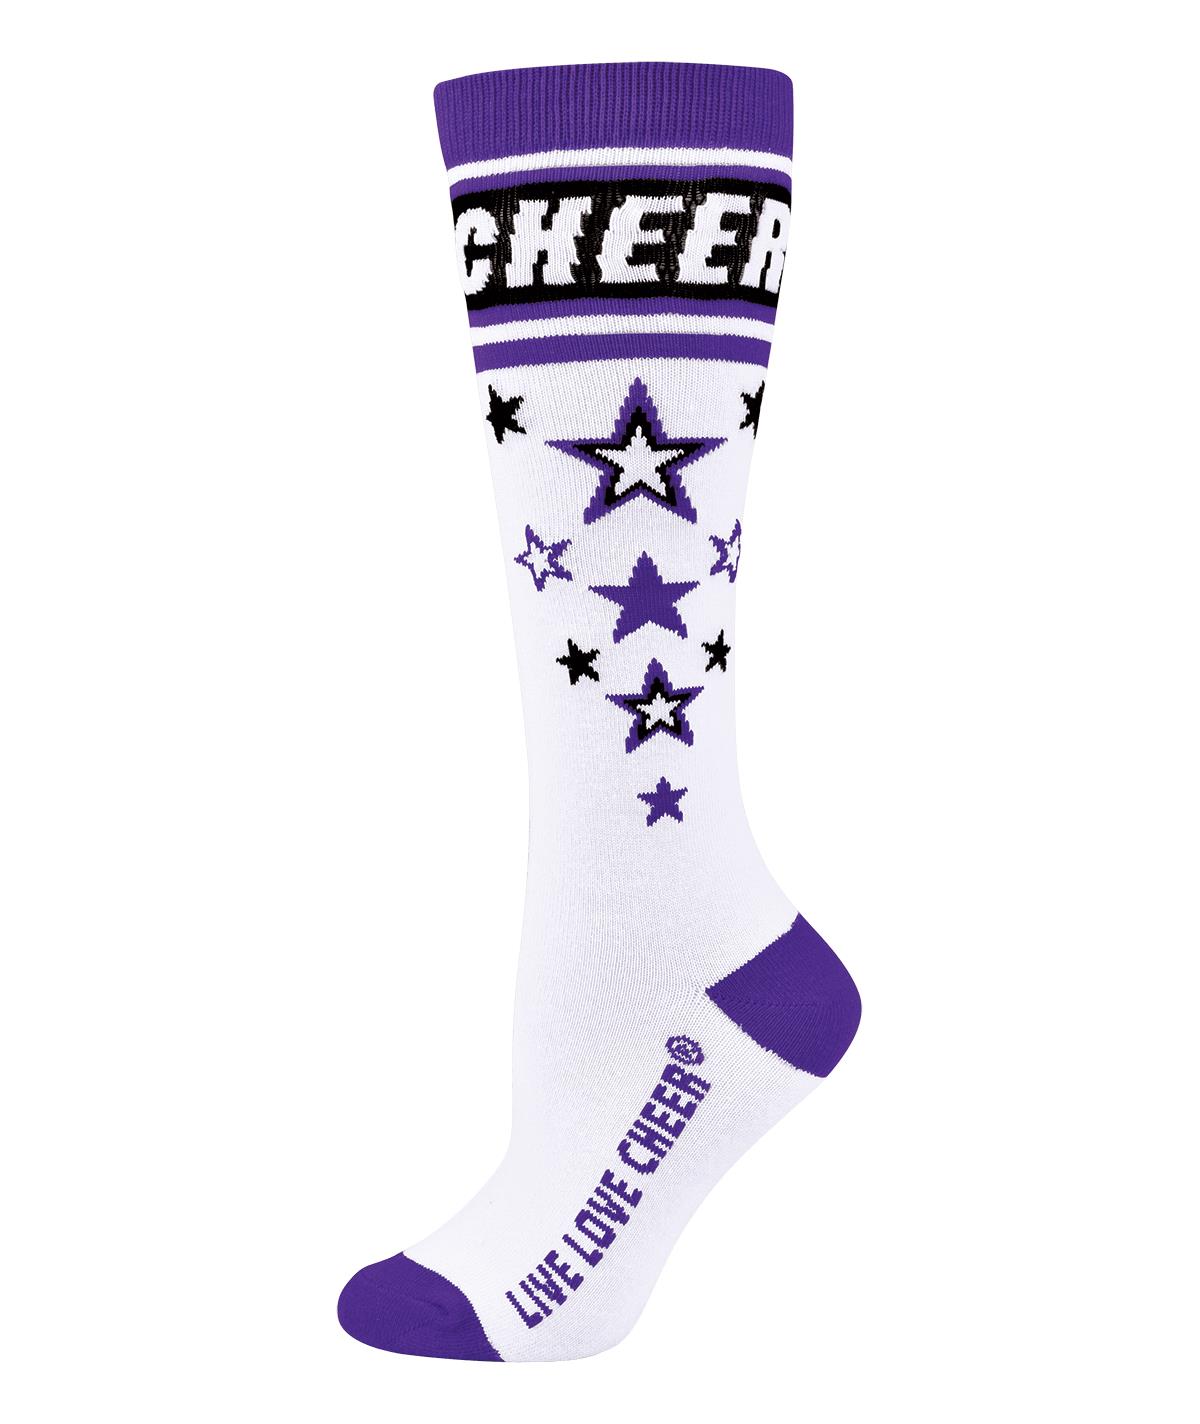 carl carranza recommends cheer knee high socks pic